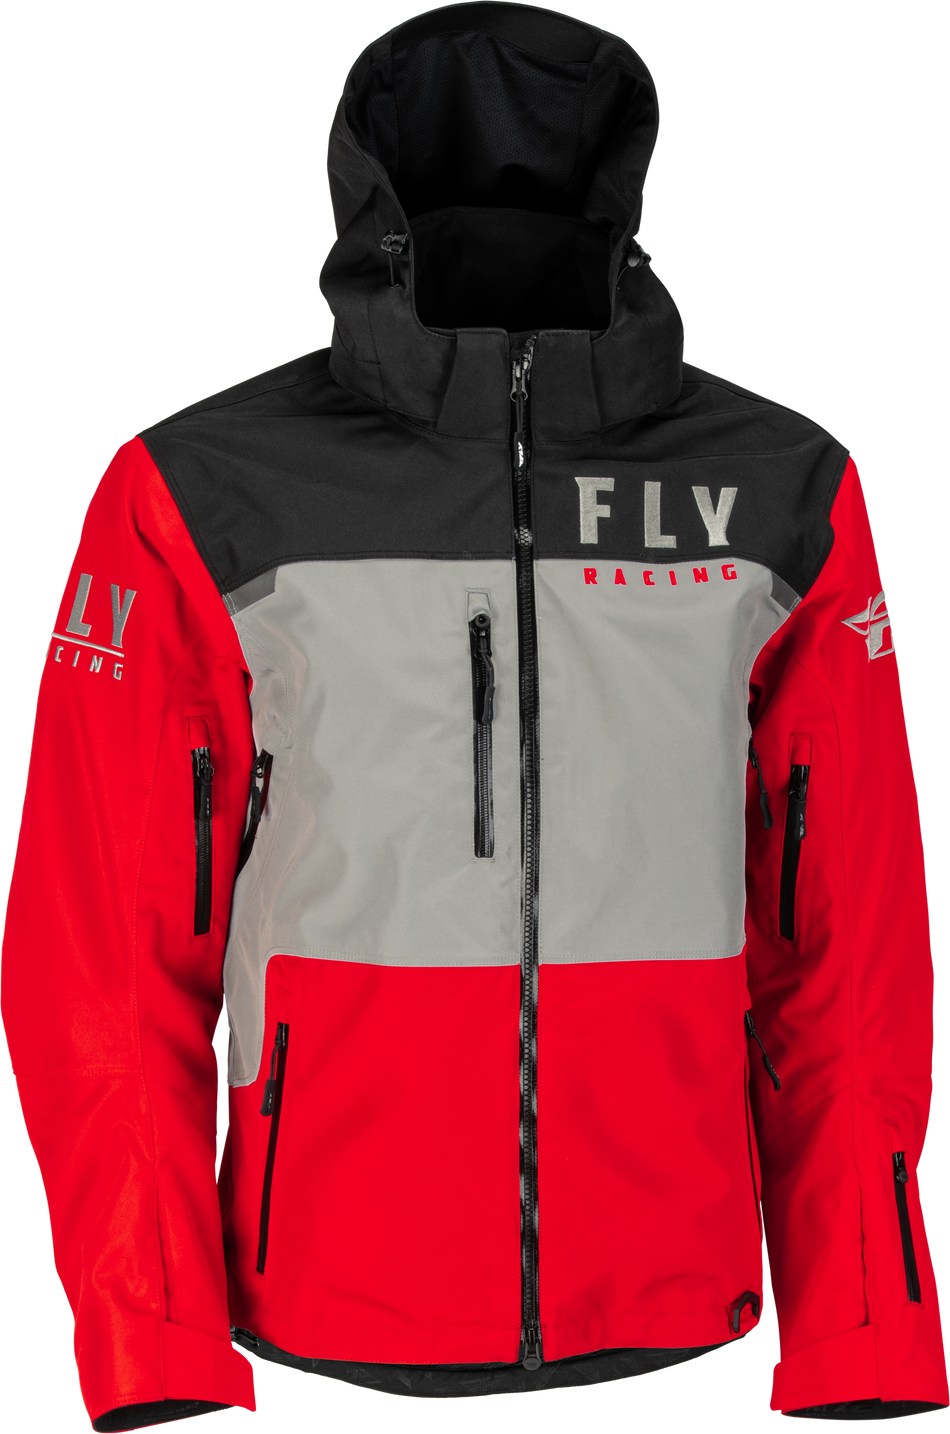 FLY RACING Carbon Jacket Red/Grey Md 470-4134M